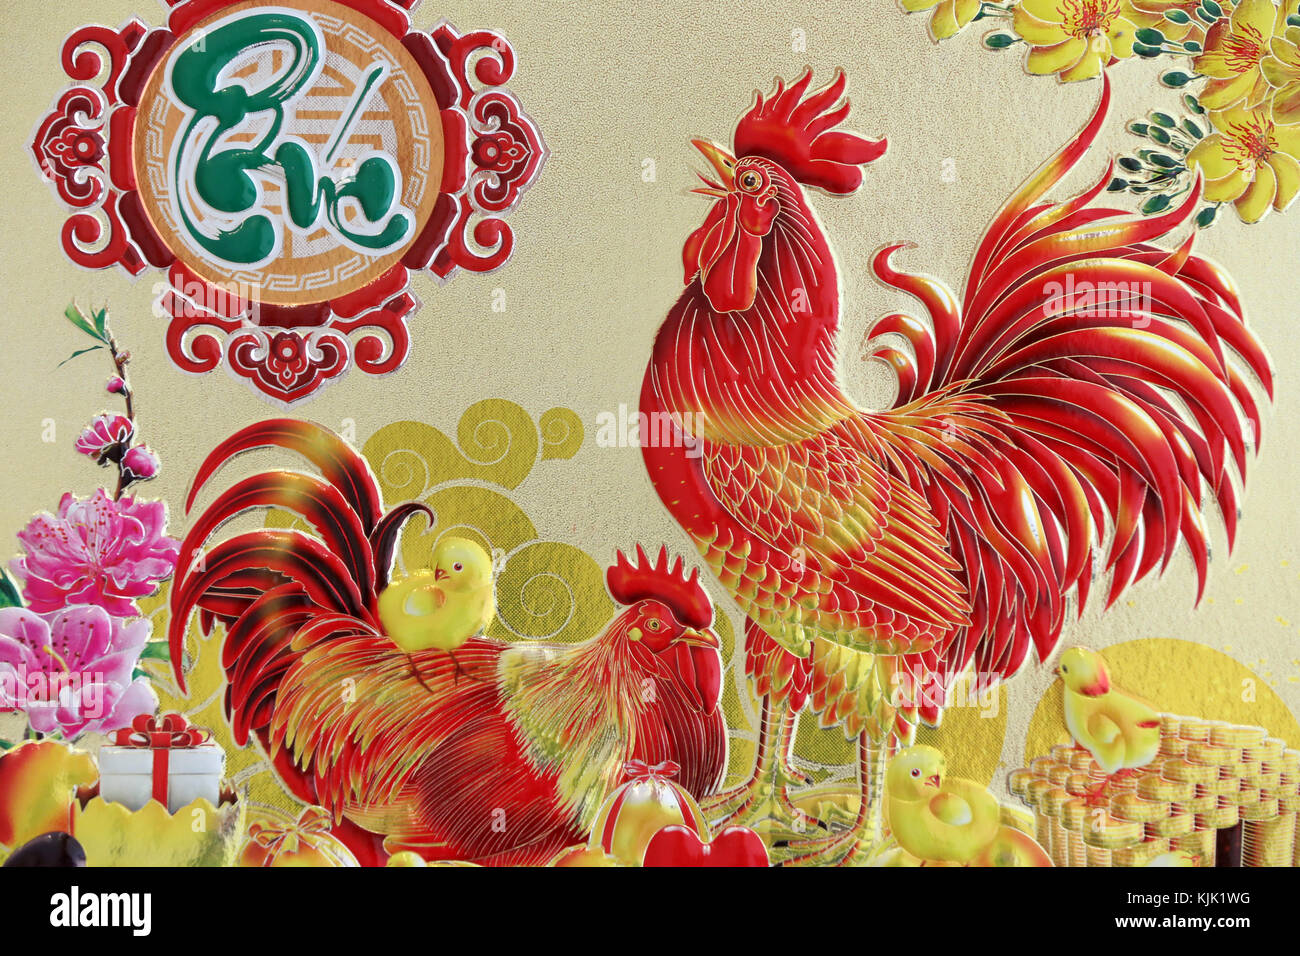 Chinese zodiac sign of rooster.  Danang. Vietnam. Stock Photo